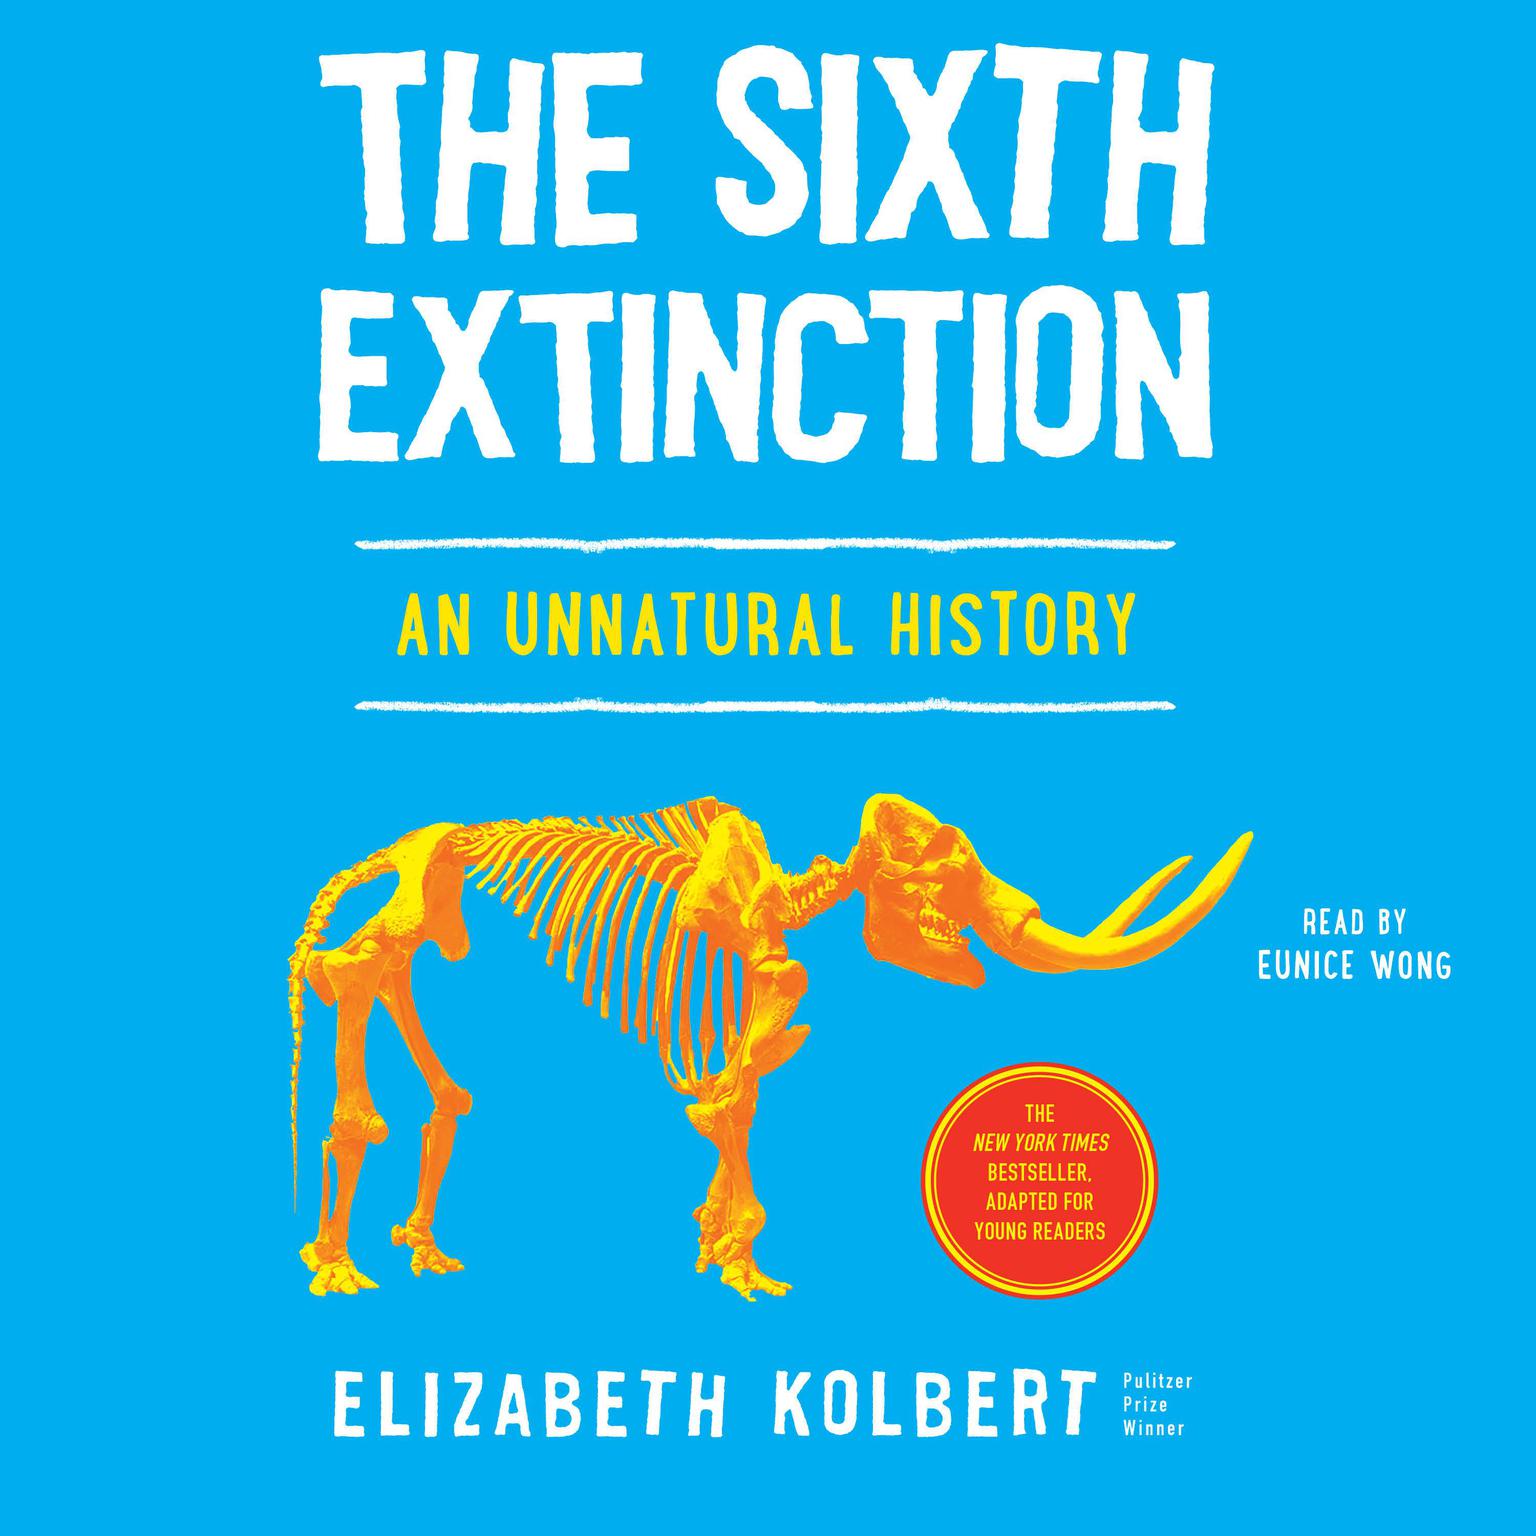 The Sixth Extinction (Young Readers Adaptation): An Unnatural History Audiobook, by Elizabeth Kolbert